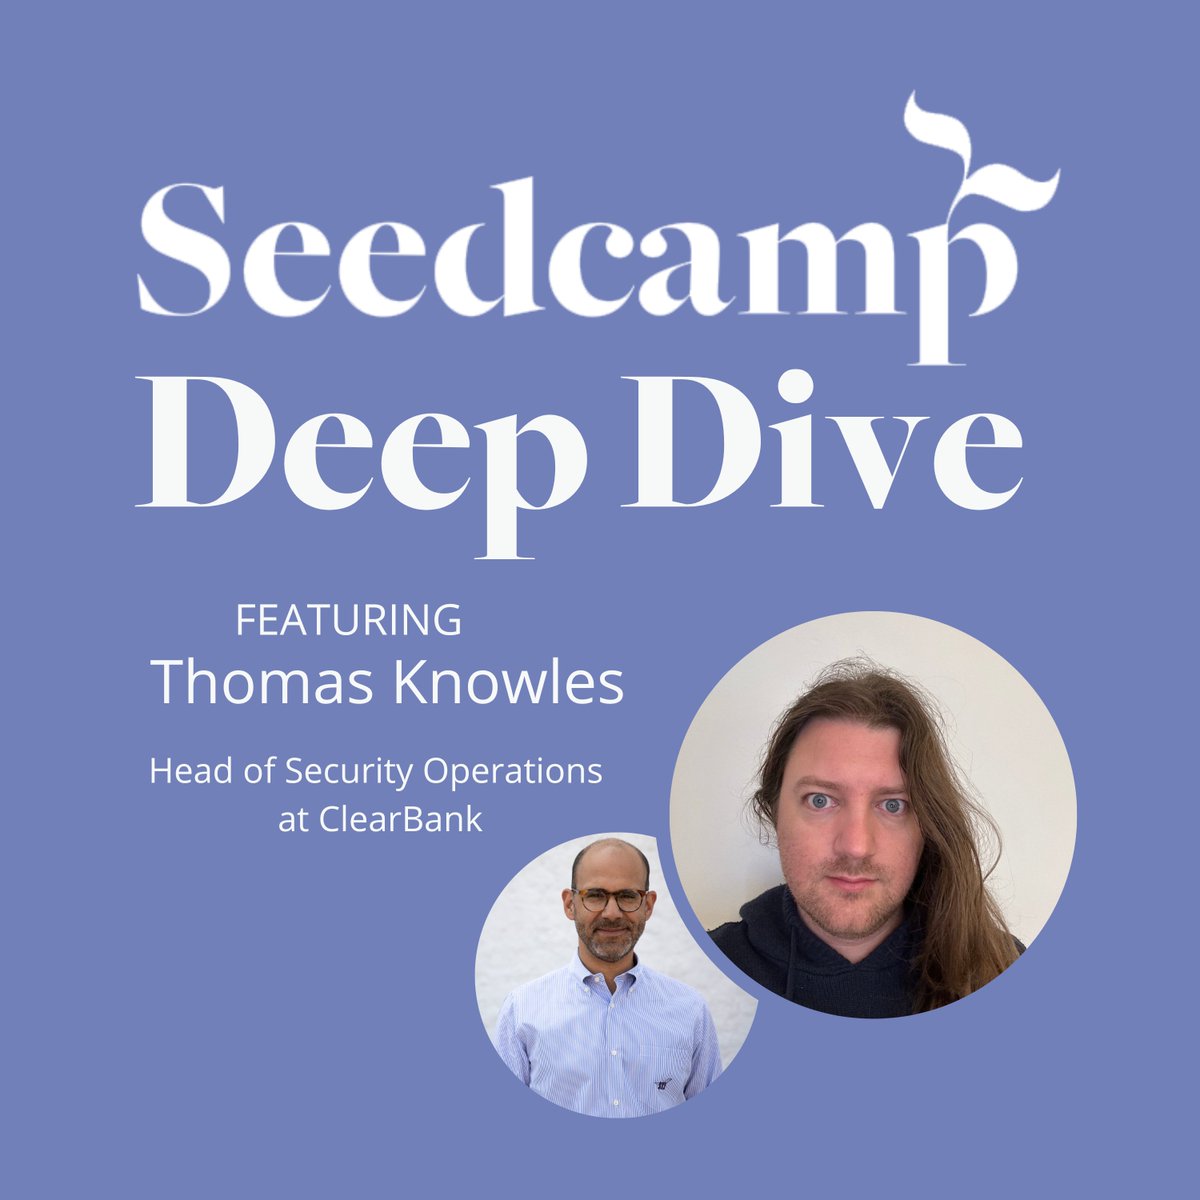 In our latest Deep Dive, our Managing Partner @cee chats with Thomas Knowles, Head of Security Ops @clear_bank, about all things cybersec - from essential foundations for early-stage startups to certifications & threat intelligence management. Tune in sdca.mp/TMIK_Cybersec